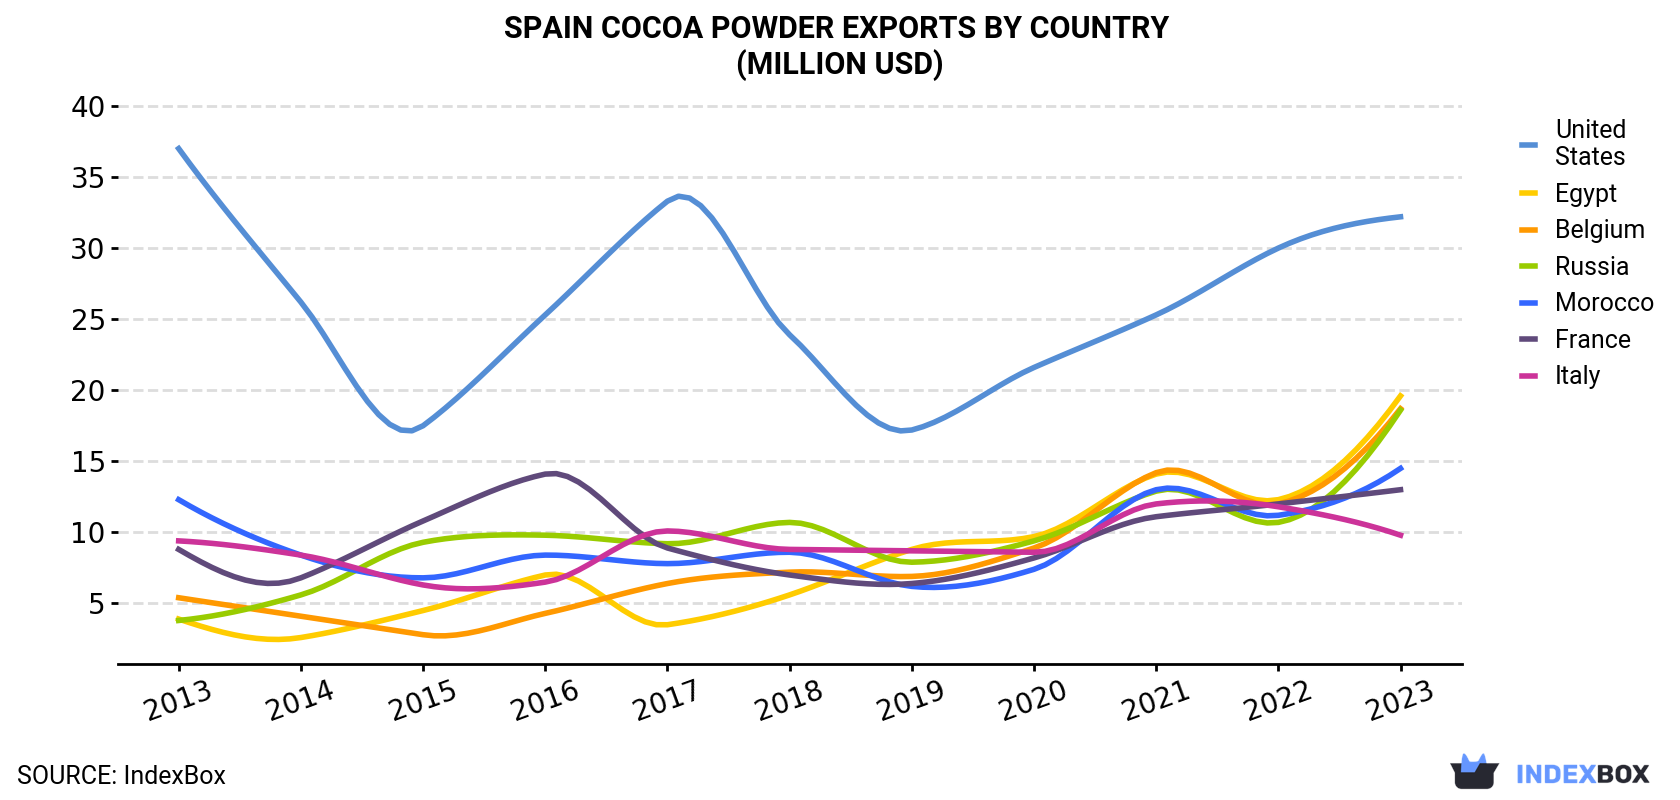 Spain Cocoa Powder Exports By Country (Million USD)